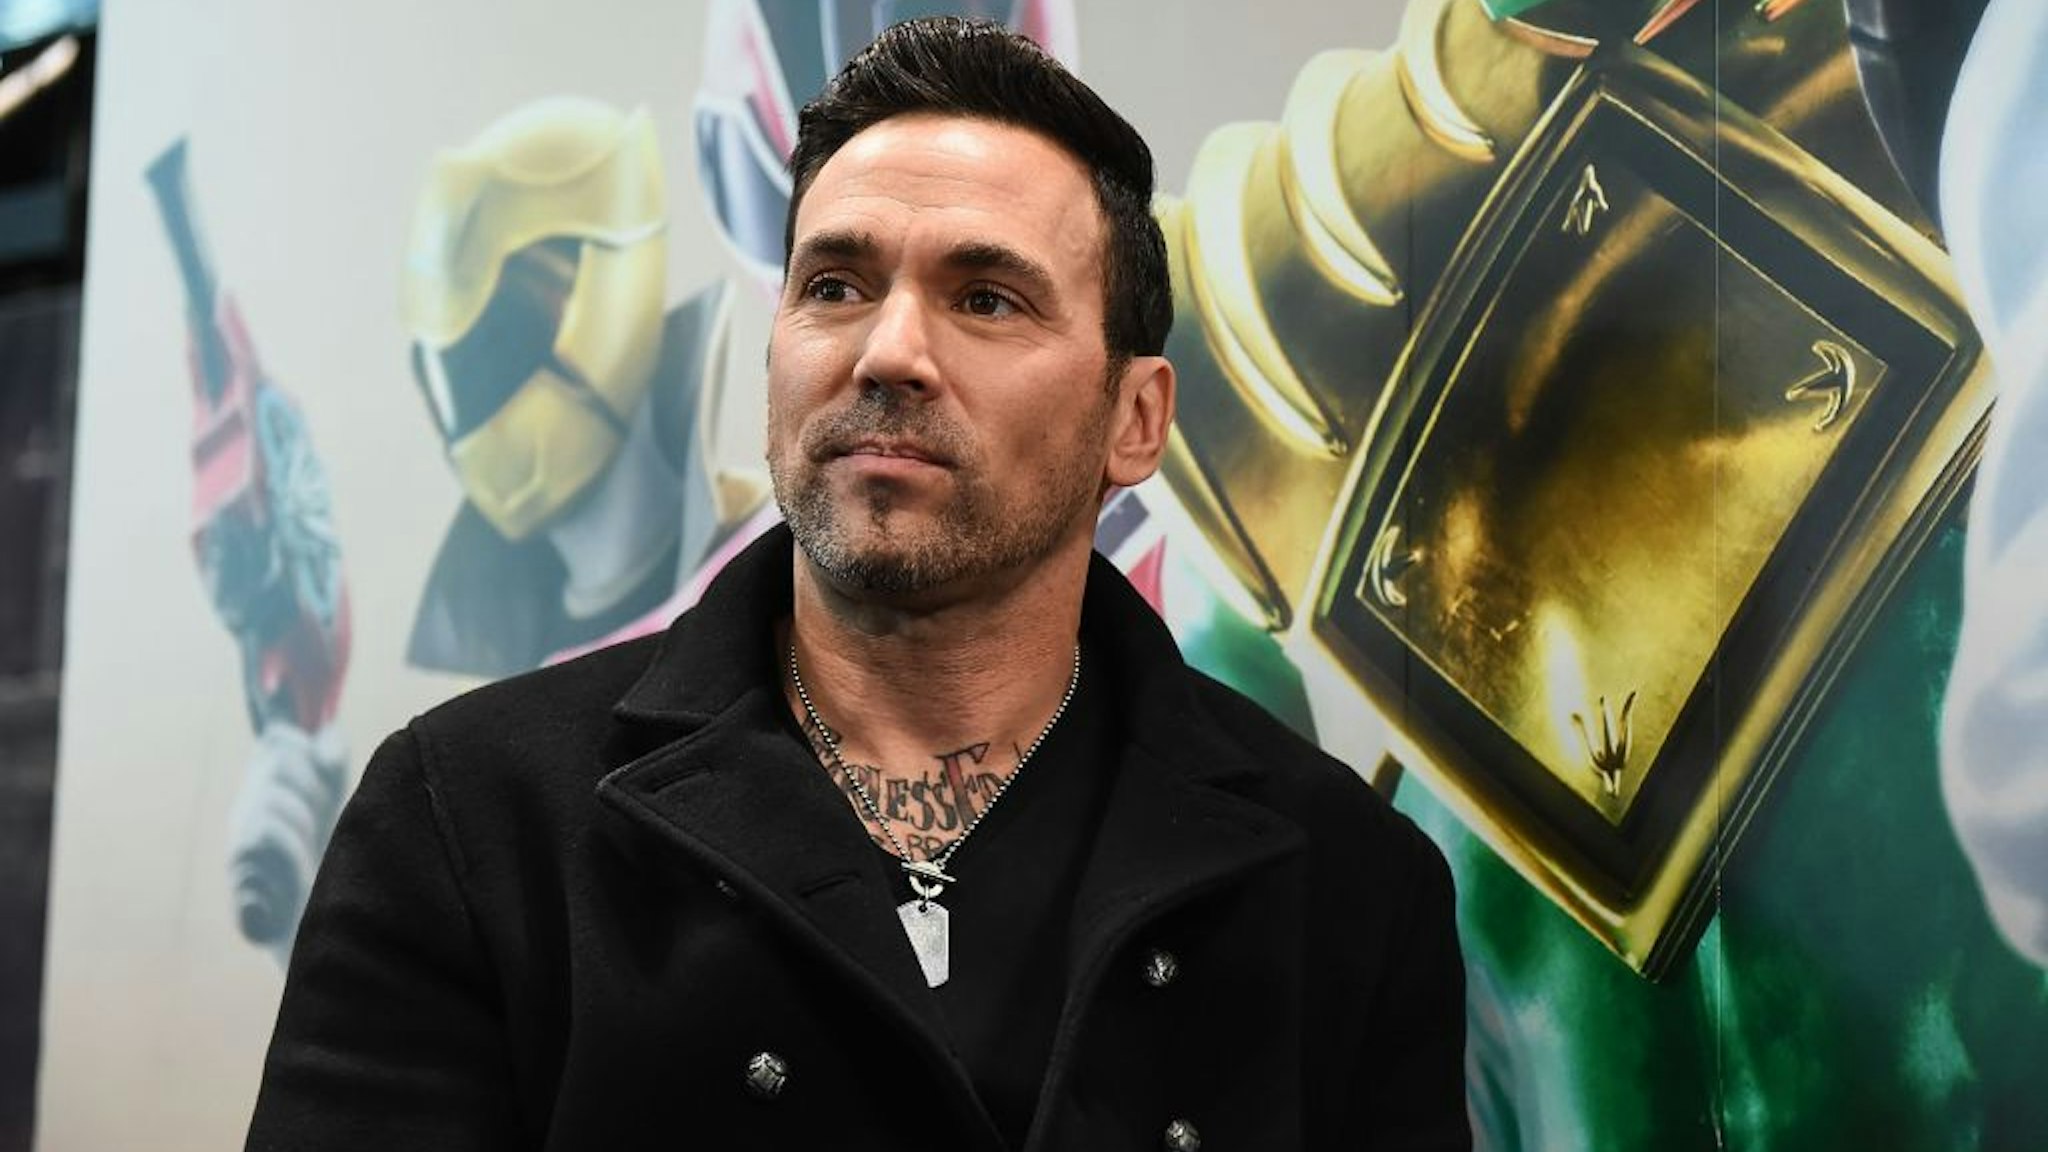 NEW YORK, NY - OCTOBER 05: Jason David Frank of the Mighty Morphin Power Rangers attends the Saban's Power Rangers Legacy Wars tournament at New York Comic Con 2017 - Day 1 on October 5, 2017 in New York City. (Photo by Daniel Zuchnik/Getty Images for Saban Brands)